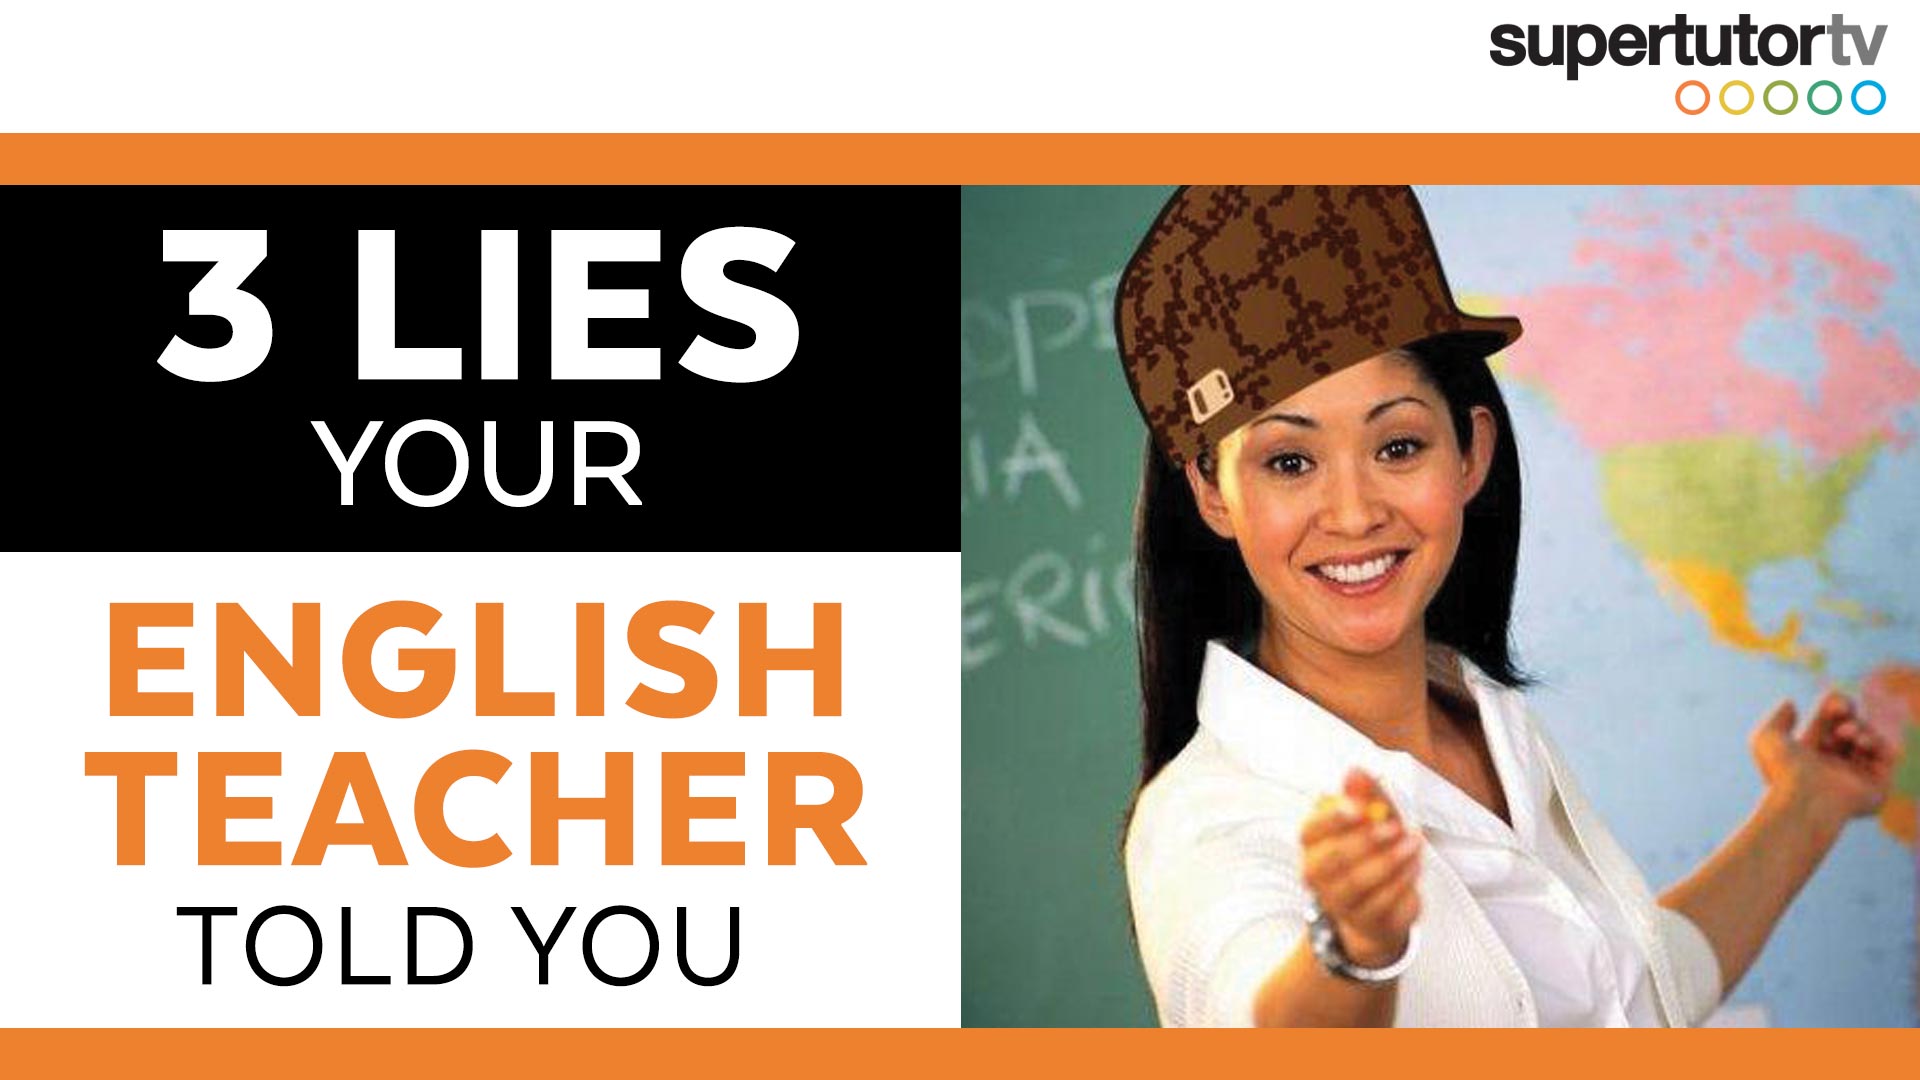 English teacher has your be to. You English. Your English teacher. Thumbnail : your English teacher. Tell a Lie to a teacher.